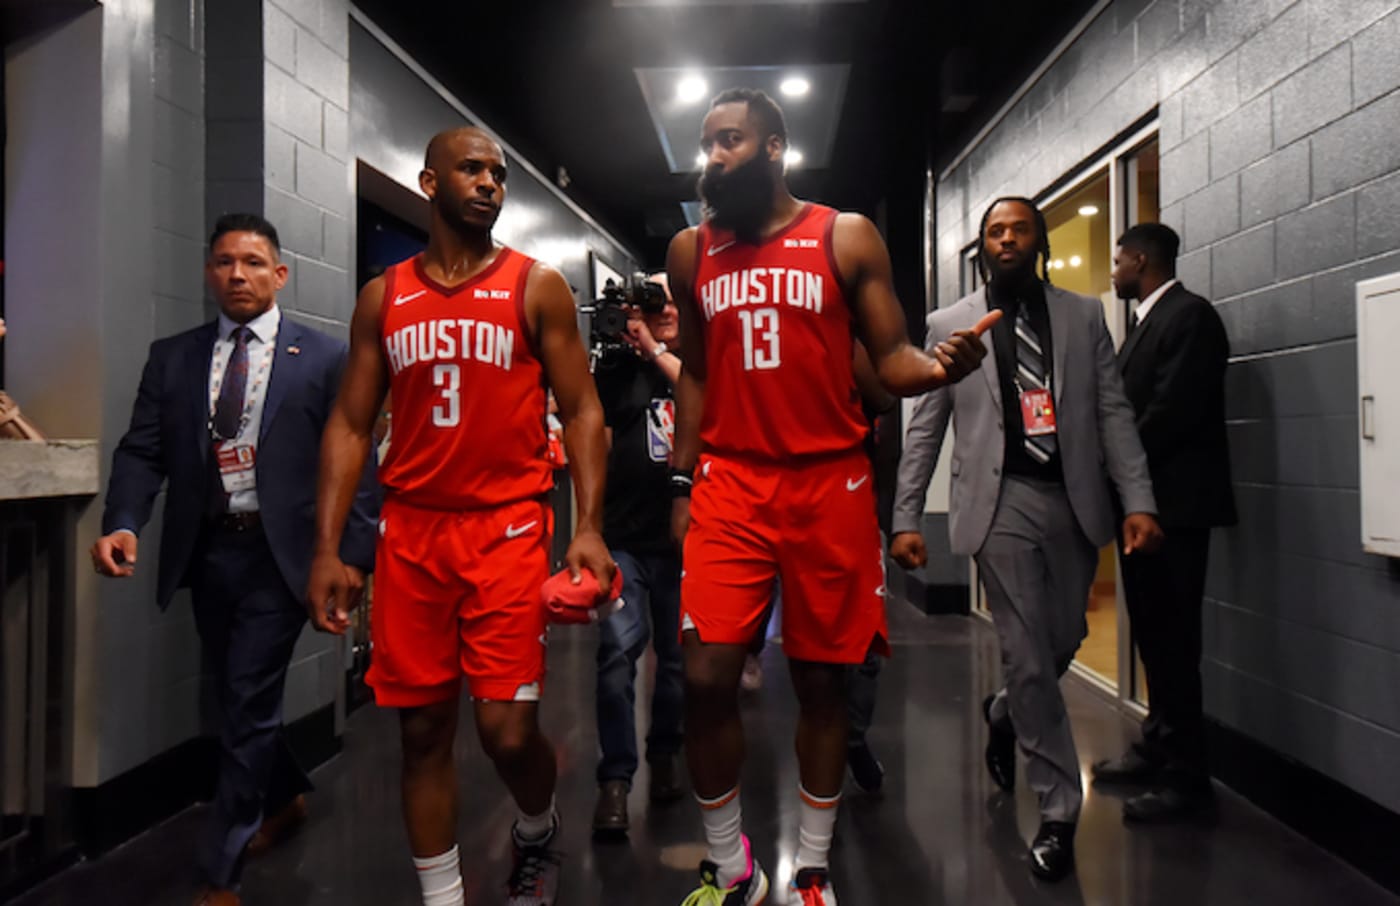 Chris Paul and James Harden heading to locker room after Western Conference Semifinals Game 4.